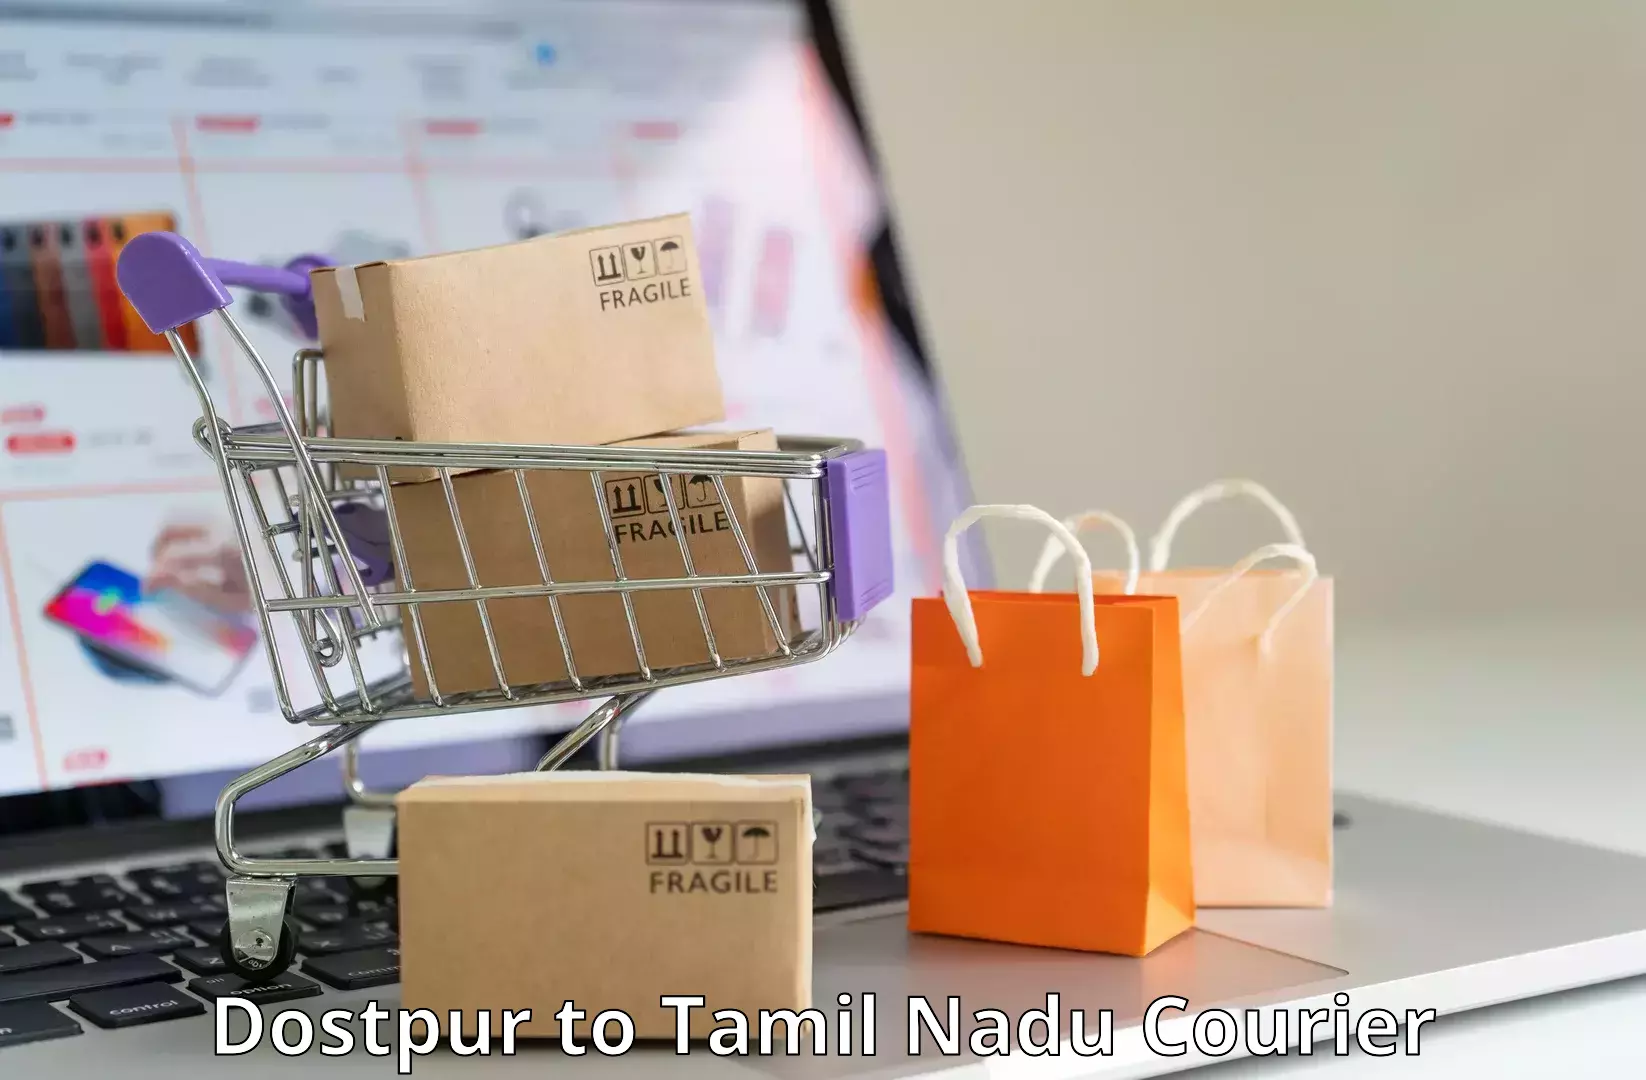 High-quality delivery services Dostpur to Dindigul